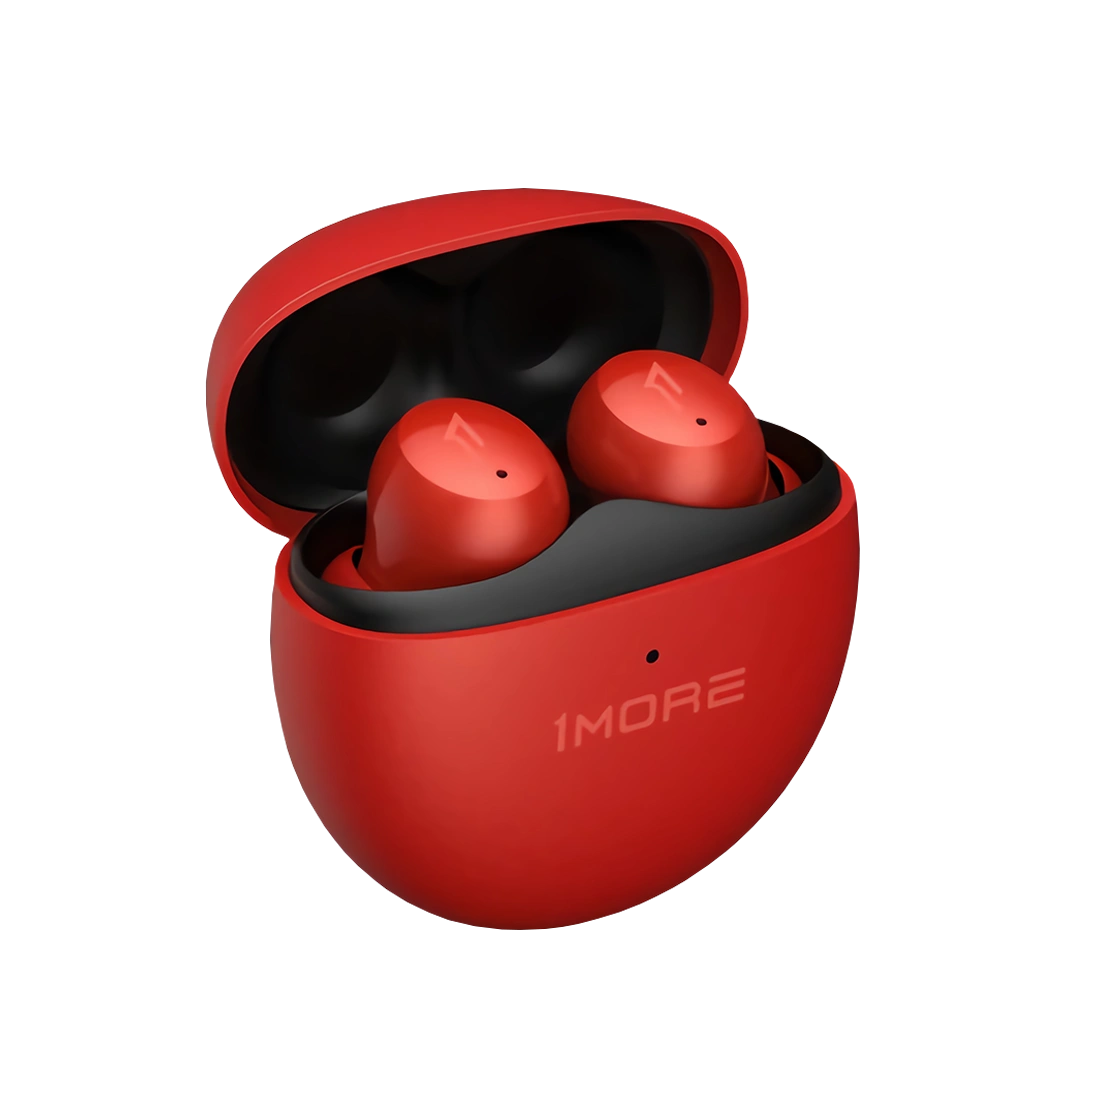 1more-wireless-earbuds-comfobuds-mini